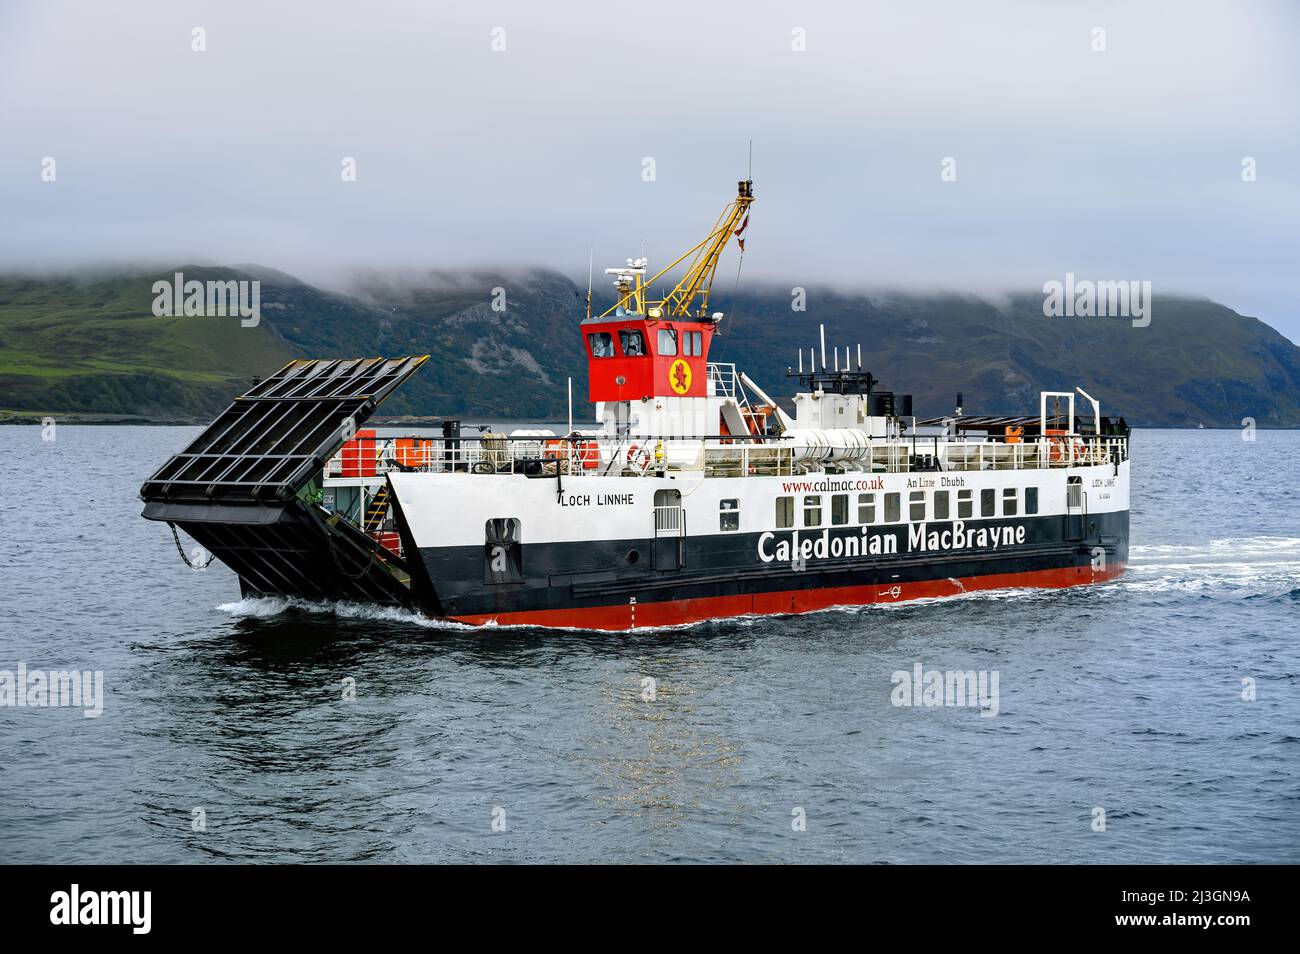 Loch Linnie is a relief ferry operated by Caledonian MacBrayne on various  inter-island and mainland routes in Scotland - October 2021. Stock Photo